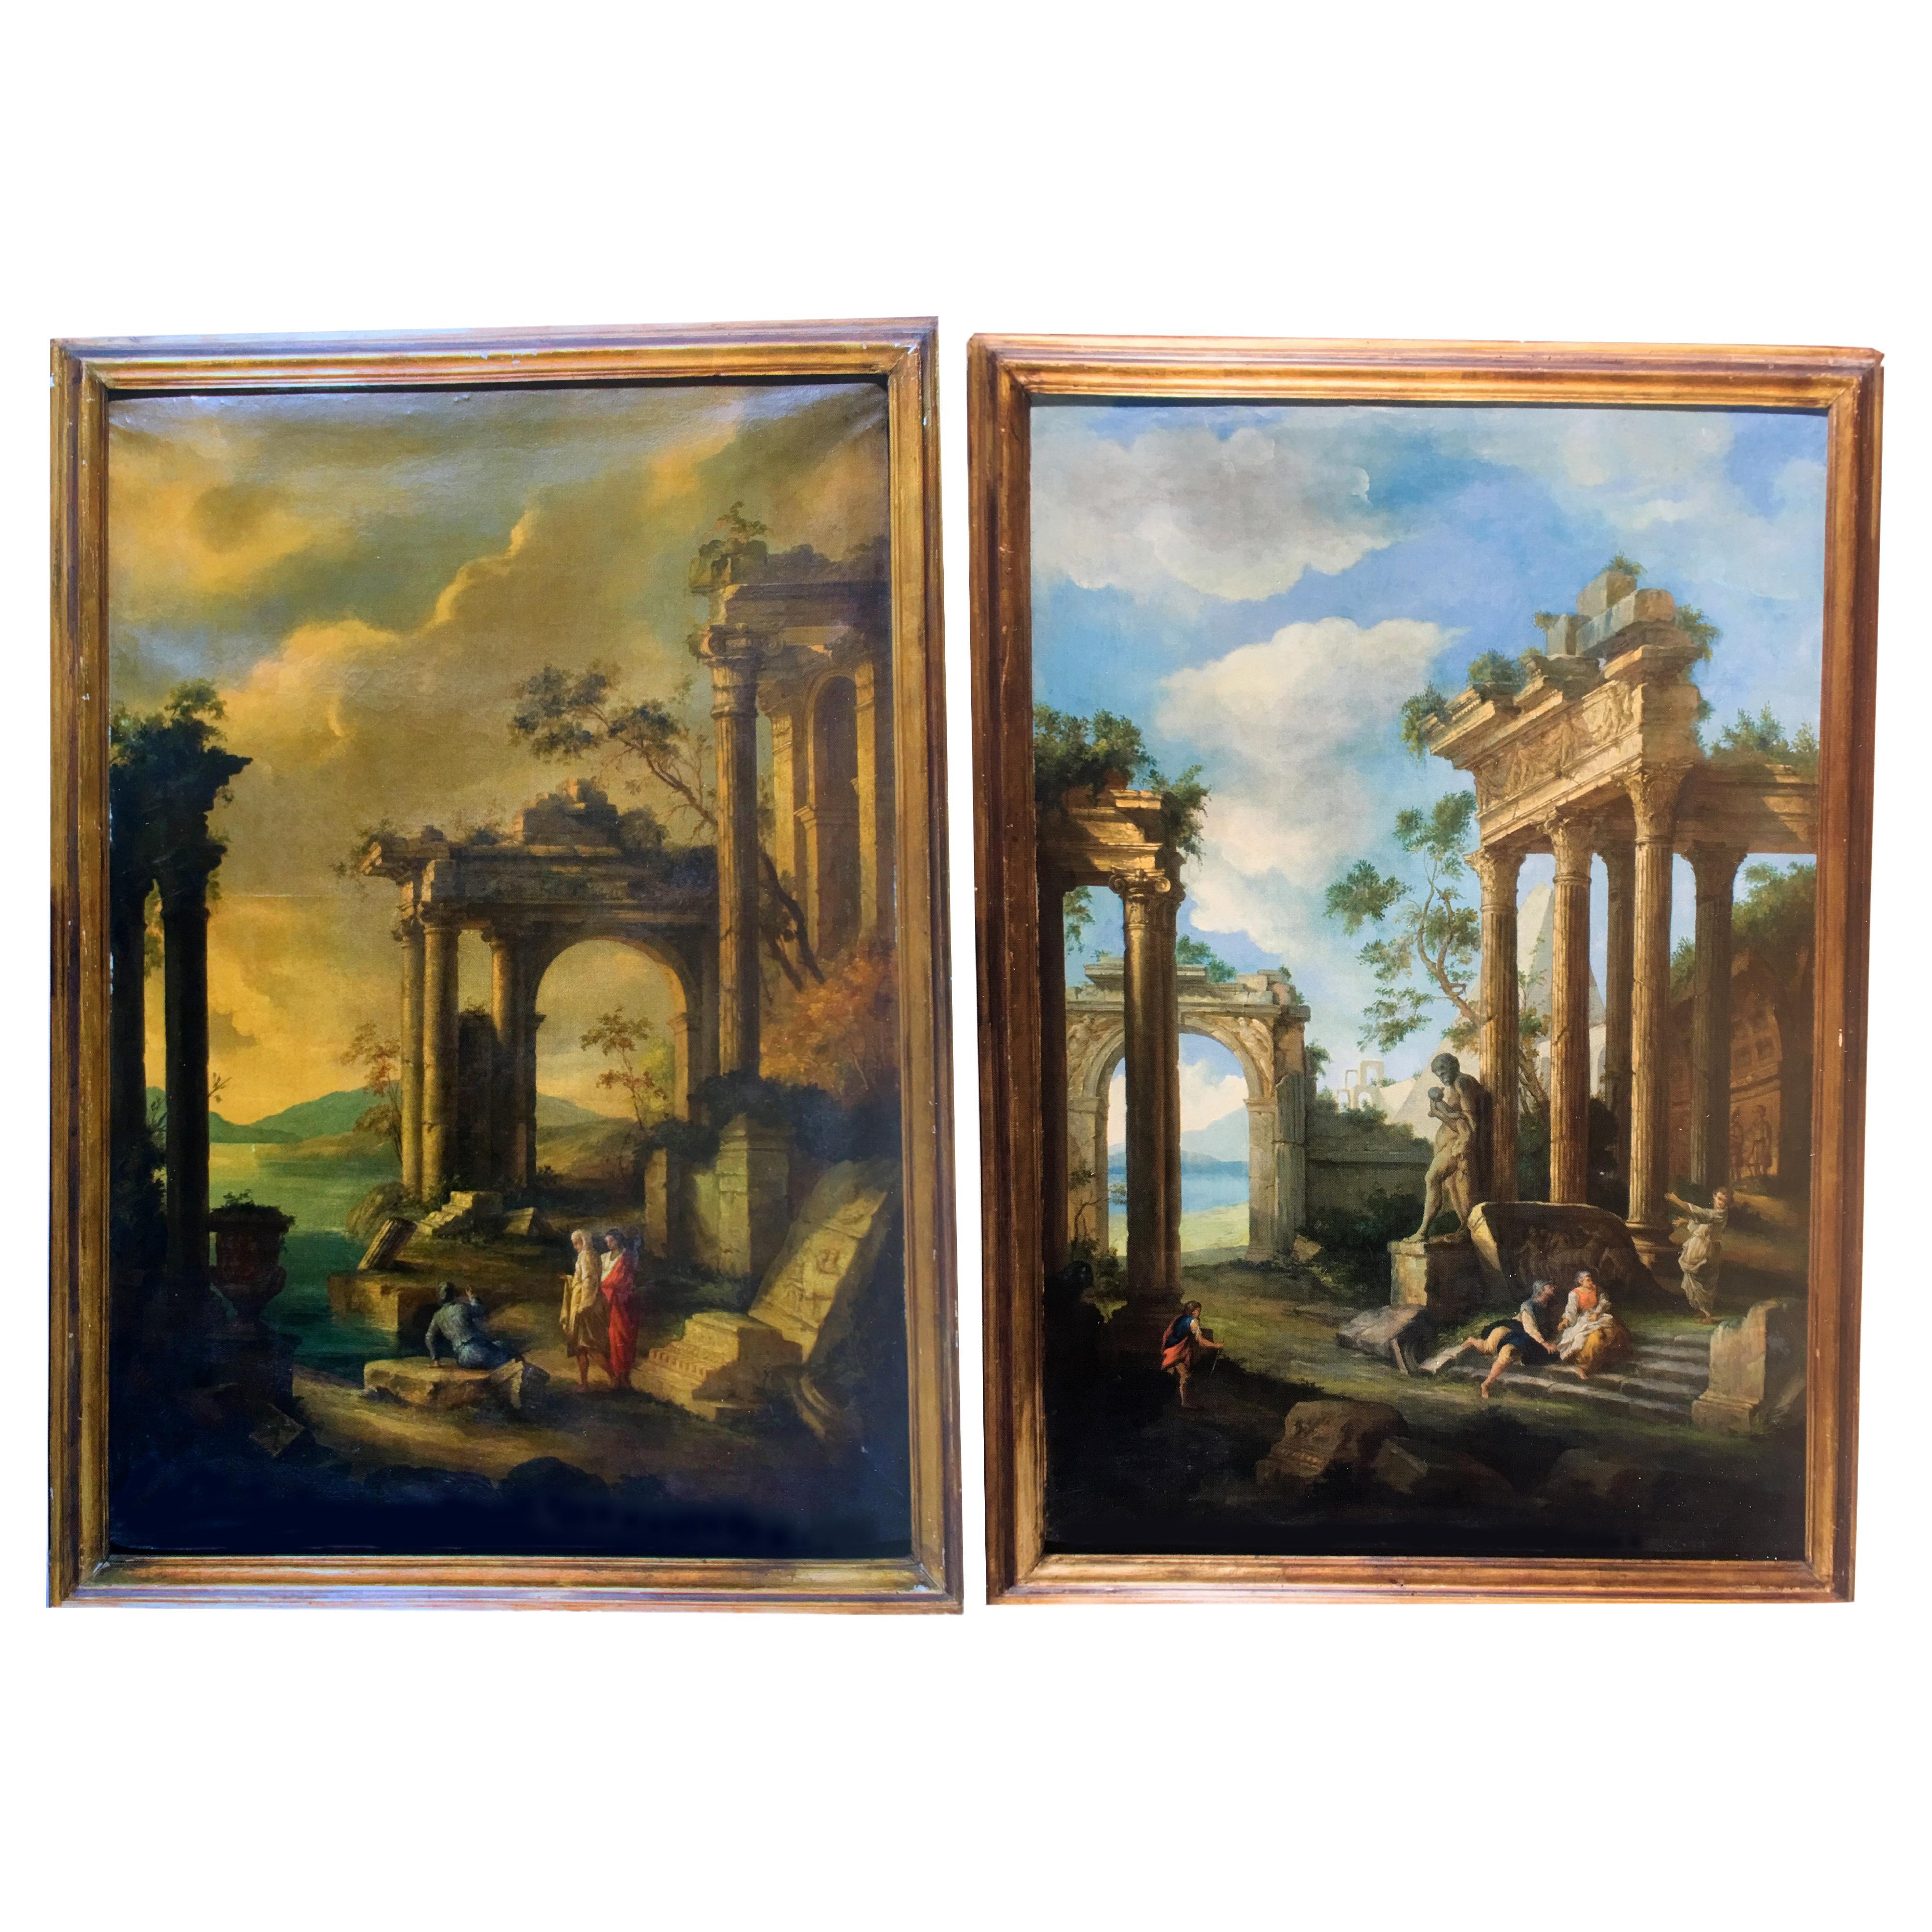 Italian Painter of 1700 "Capriccio with classical ruins and figures" For Sale